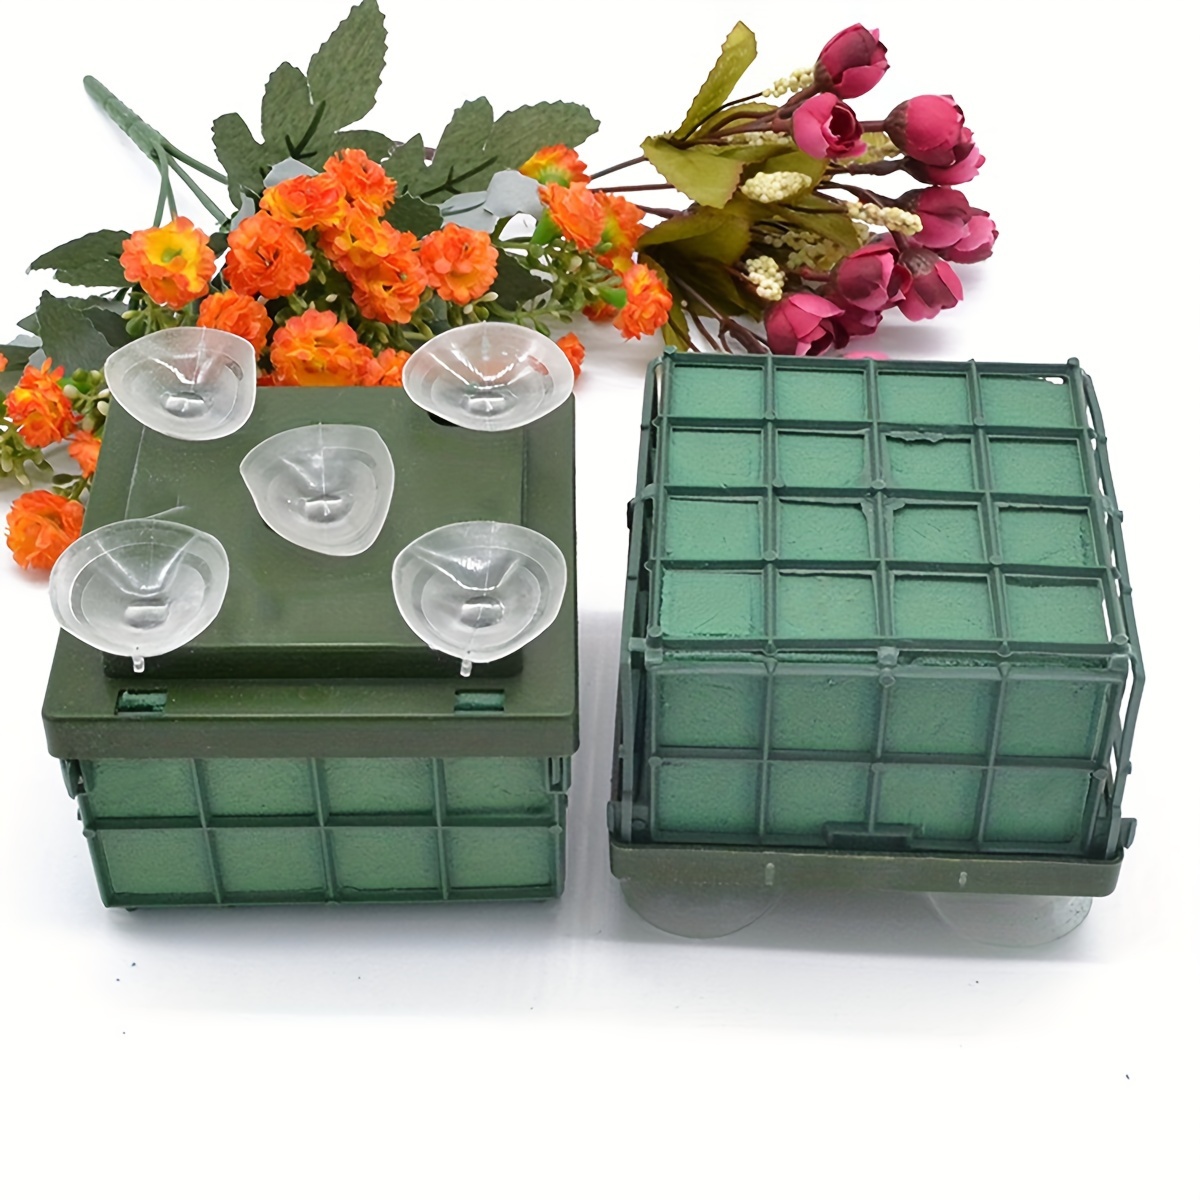 

1pc Floral Foam Block With Strong Suction Cup Base For Arrangements, Polyresin Fresh Flower Arranging Holder For Wedding Car, Florist Supplies